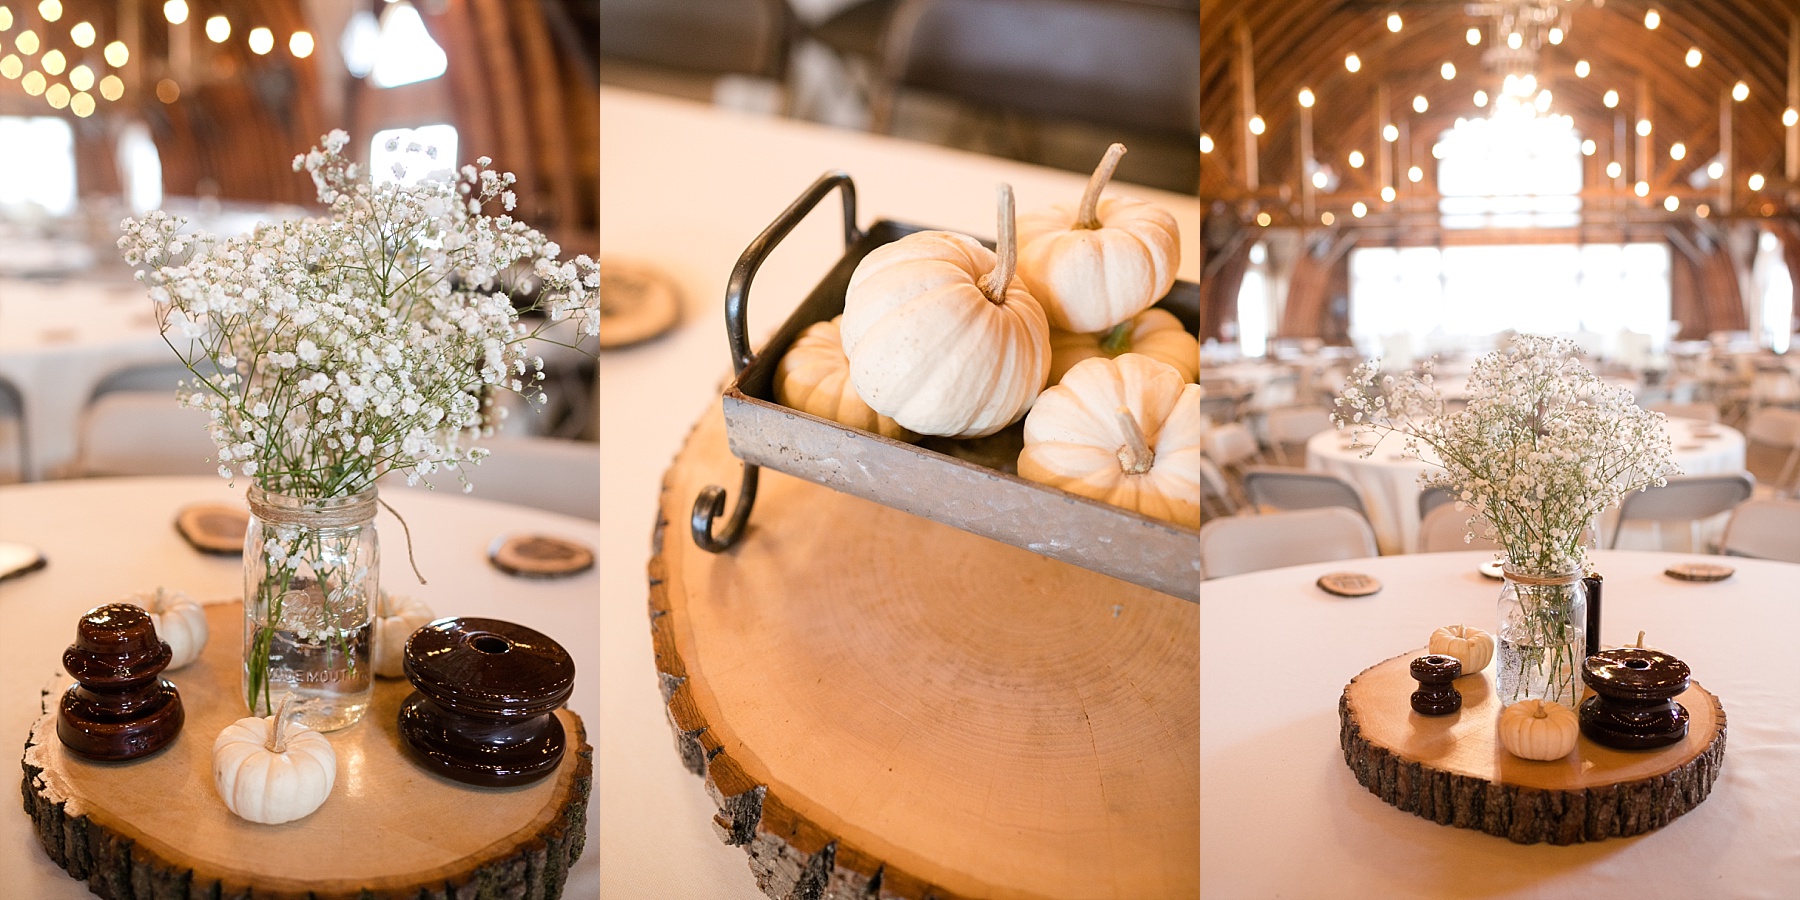 pumpkins and decor at a wedding at the barn on stoney hill